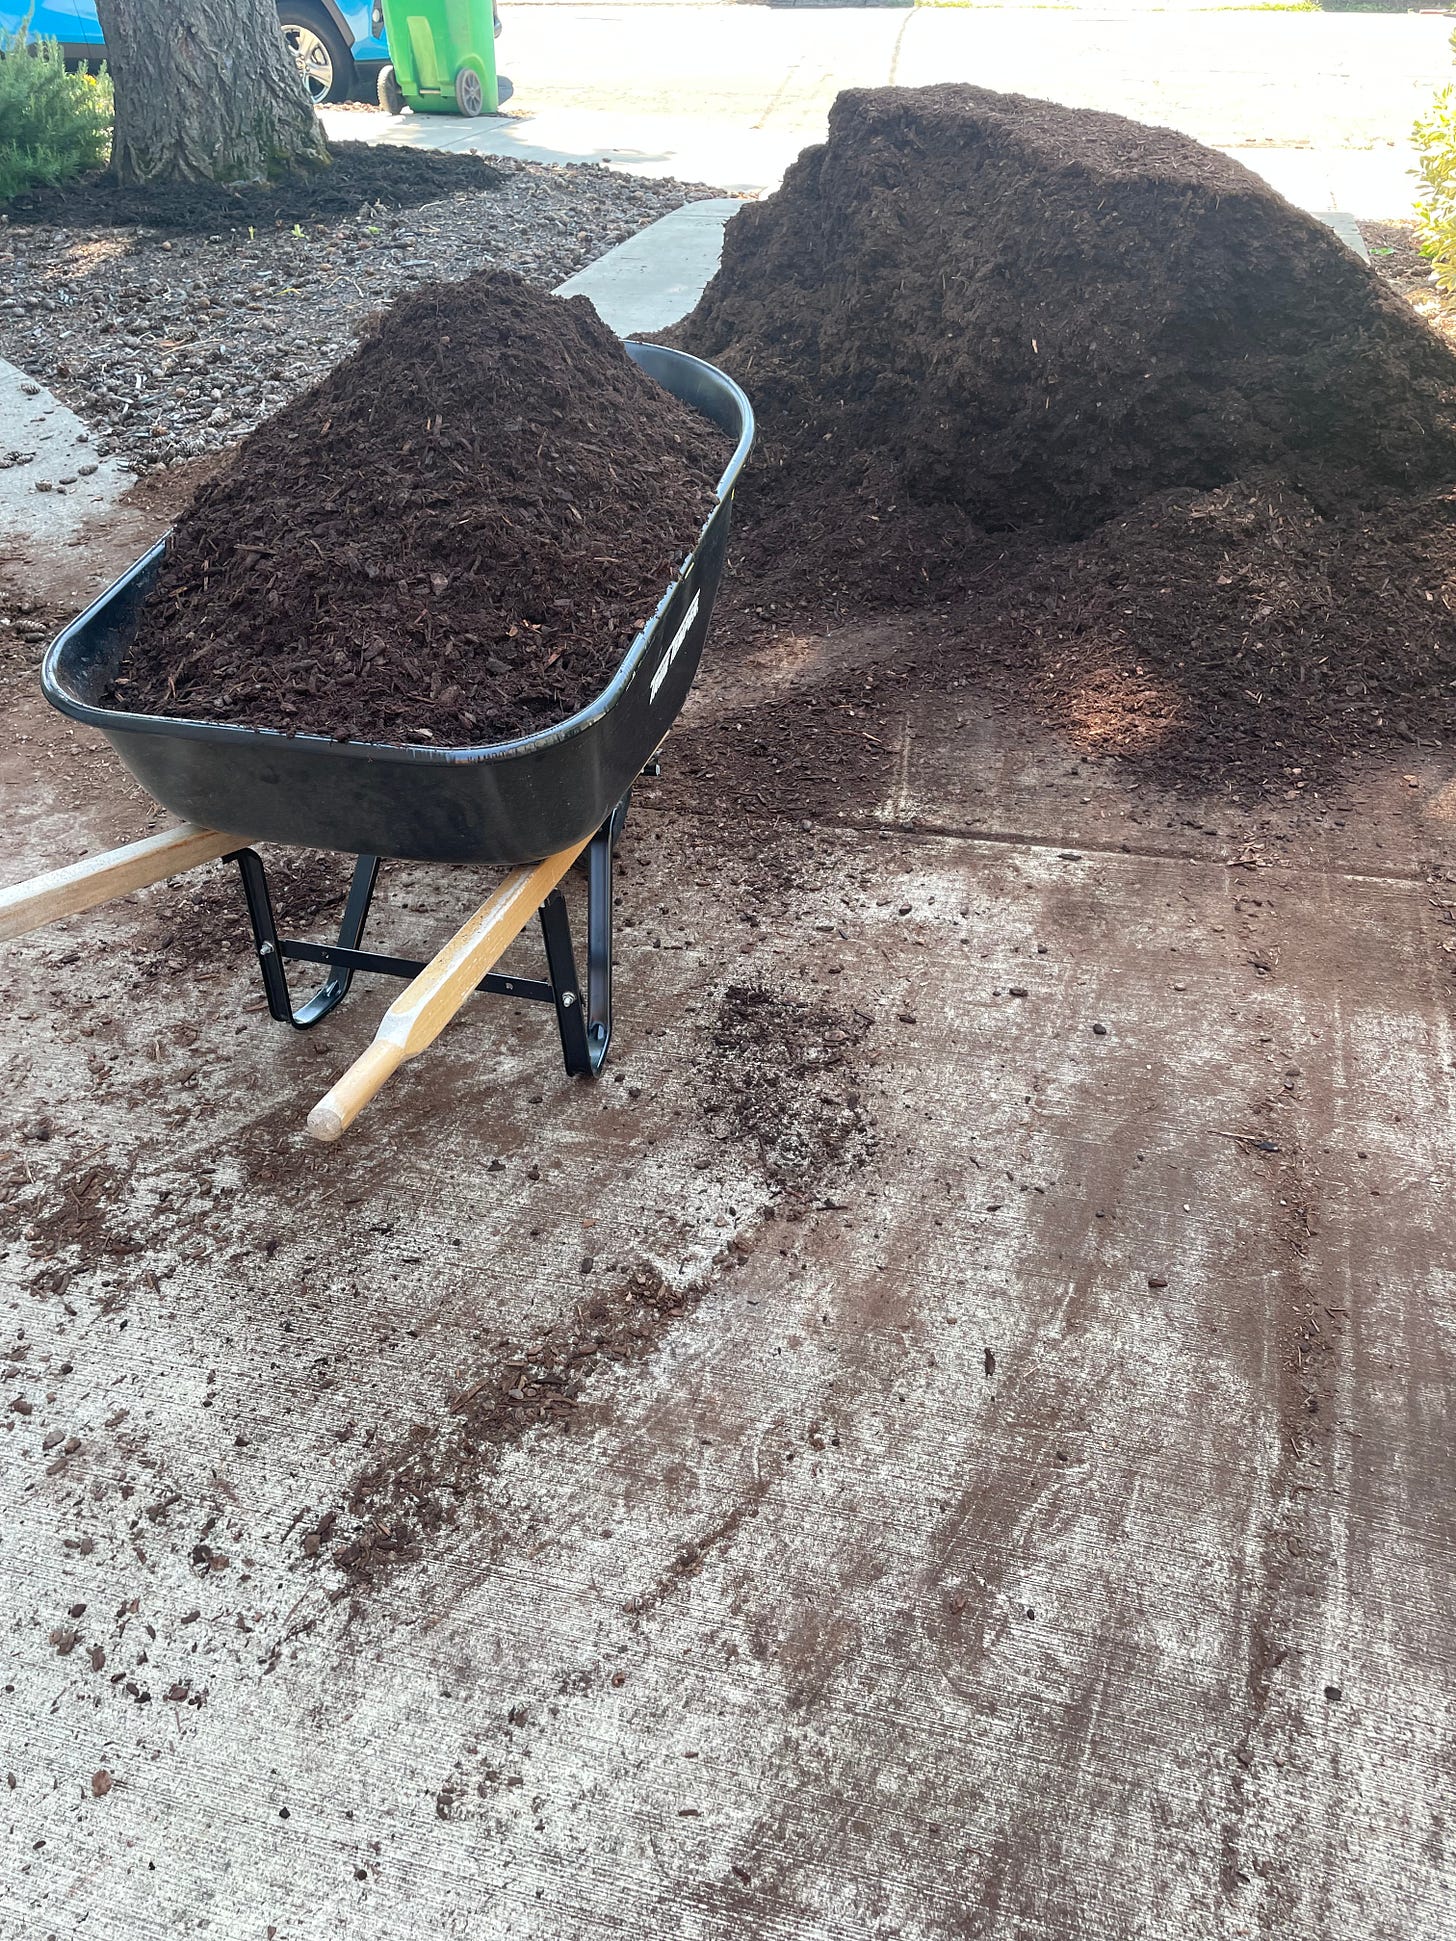 A mound of mulch being loaded into a wheelbarrow